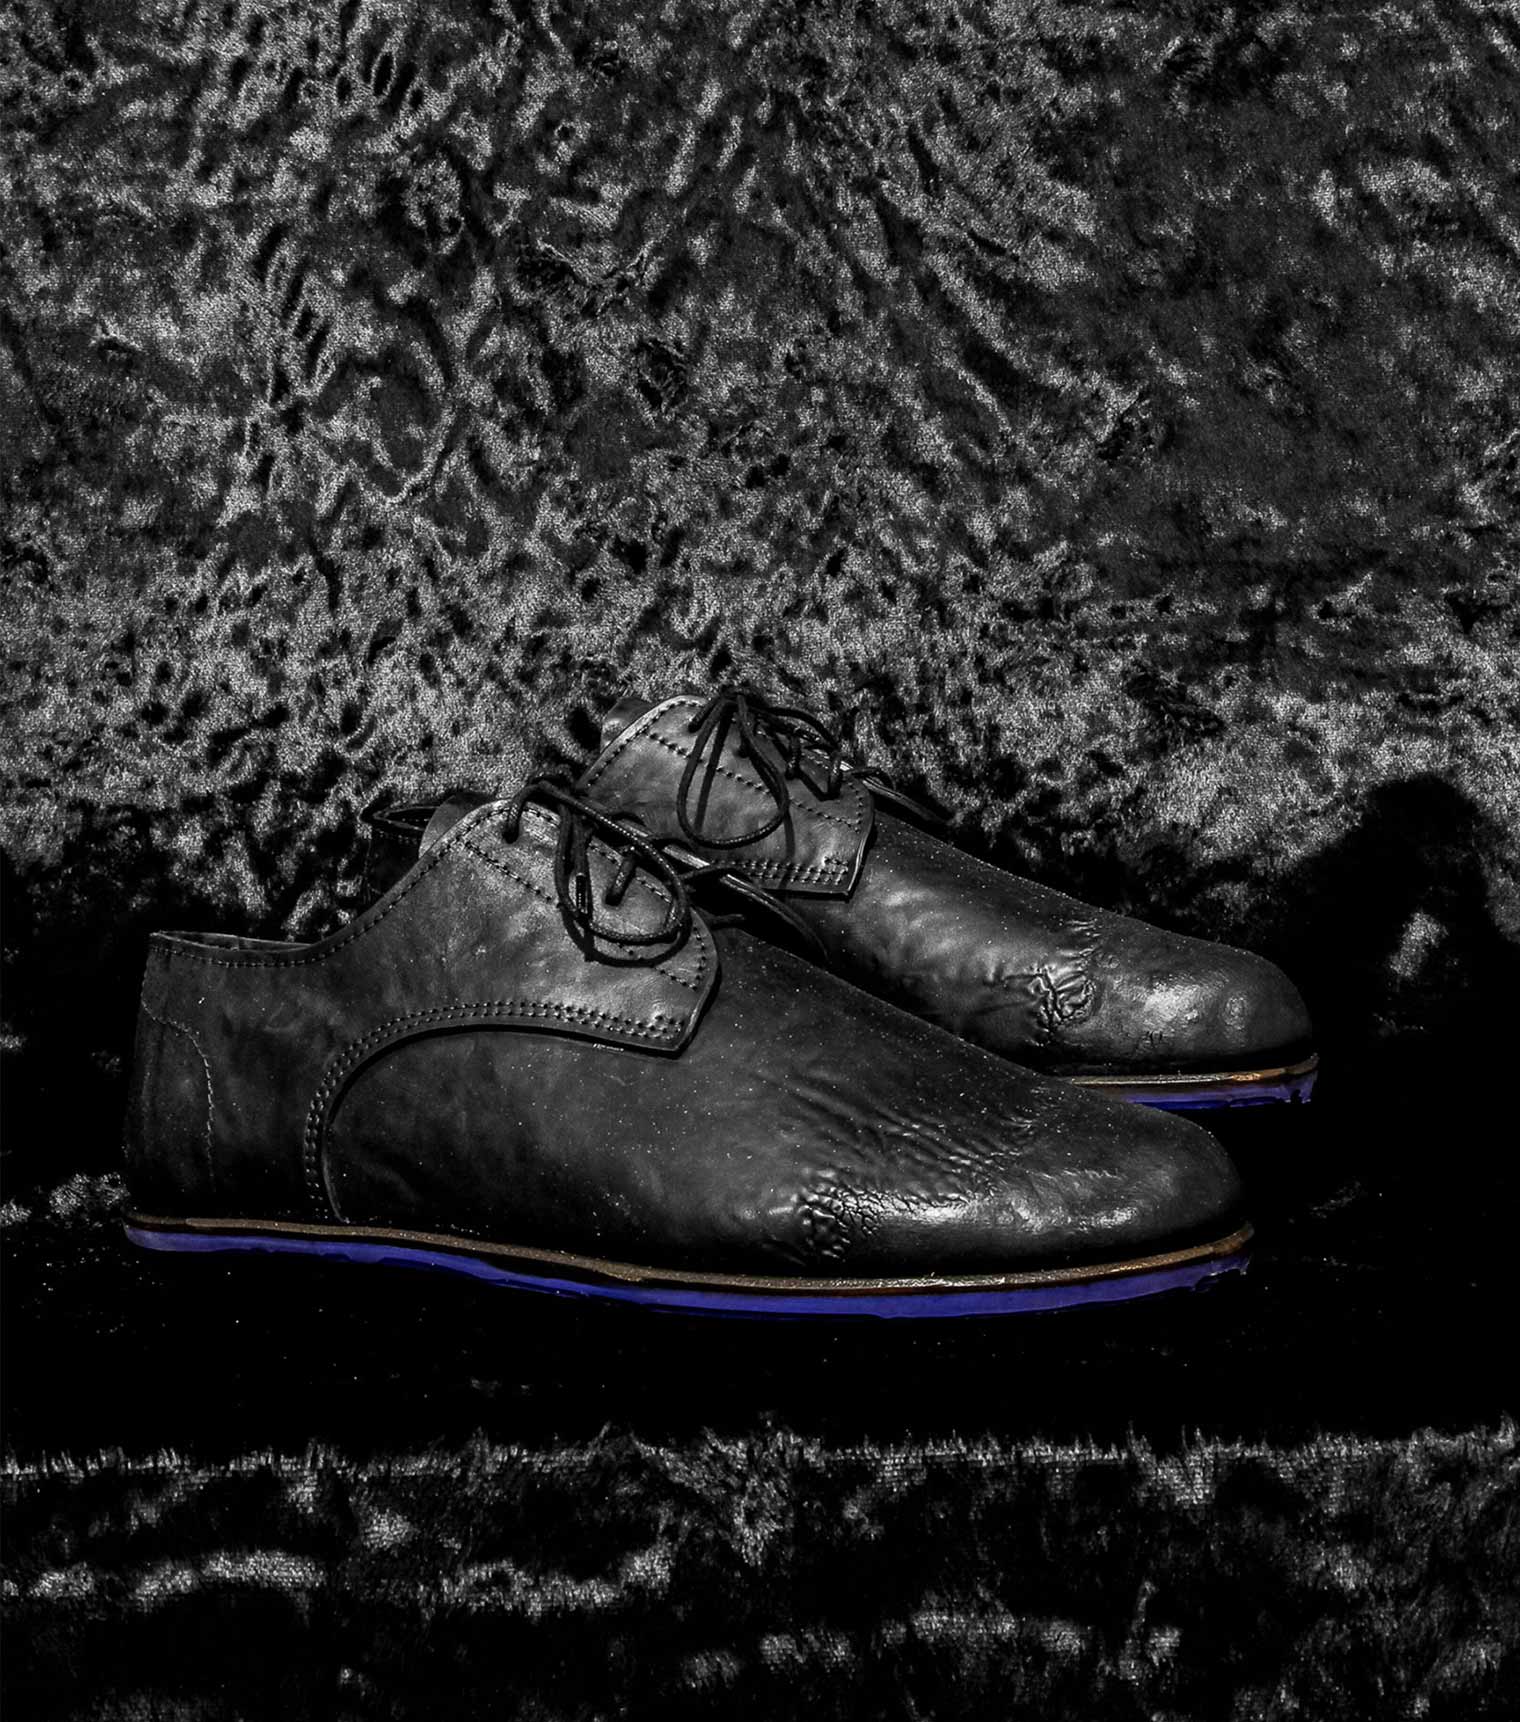 Made to Order Barefoot Derby Shoes